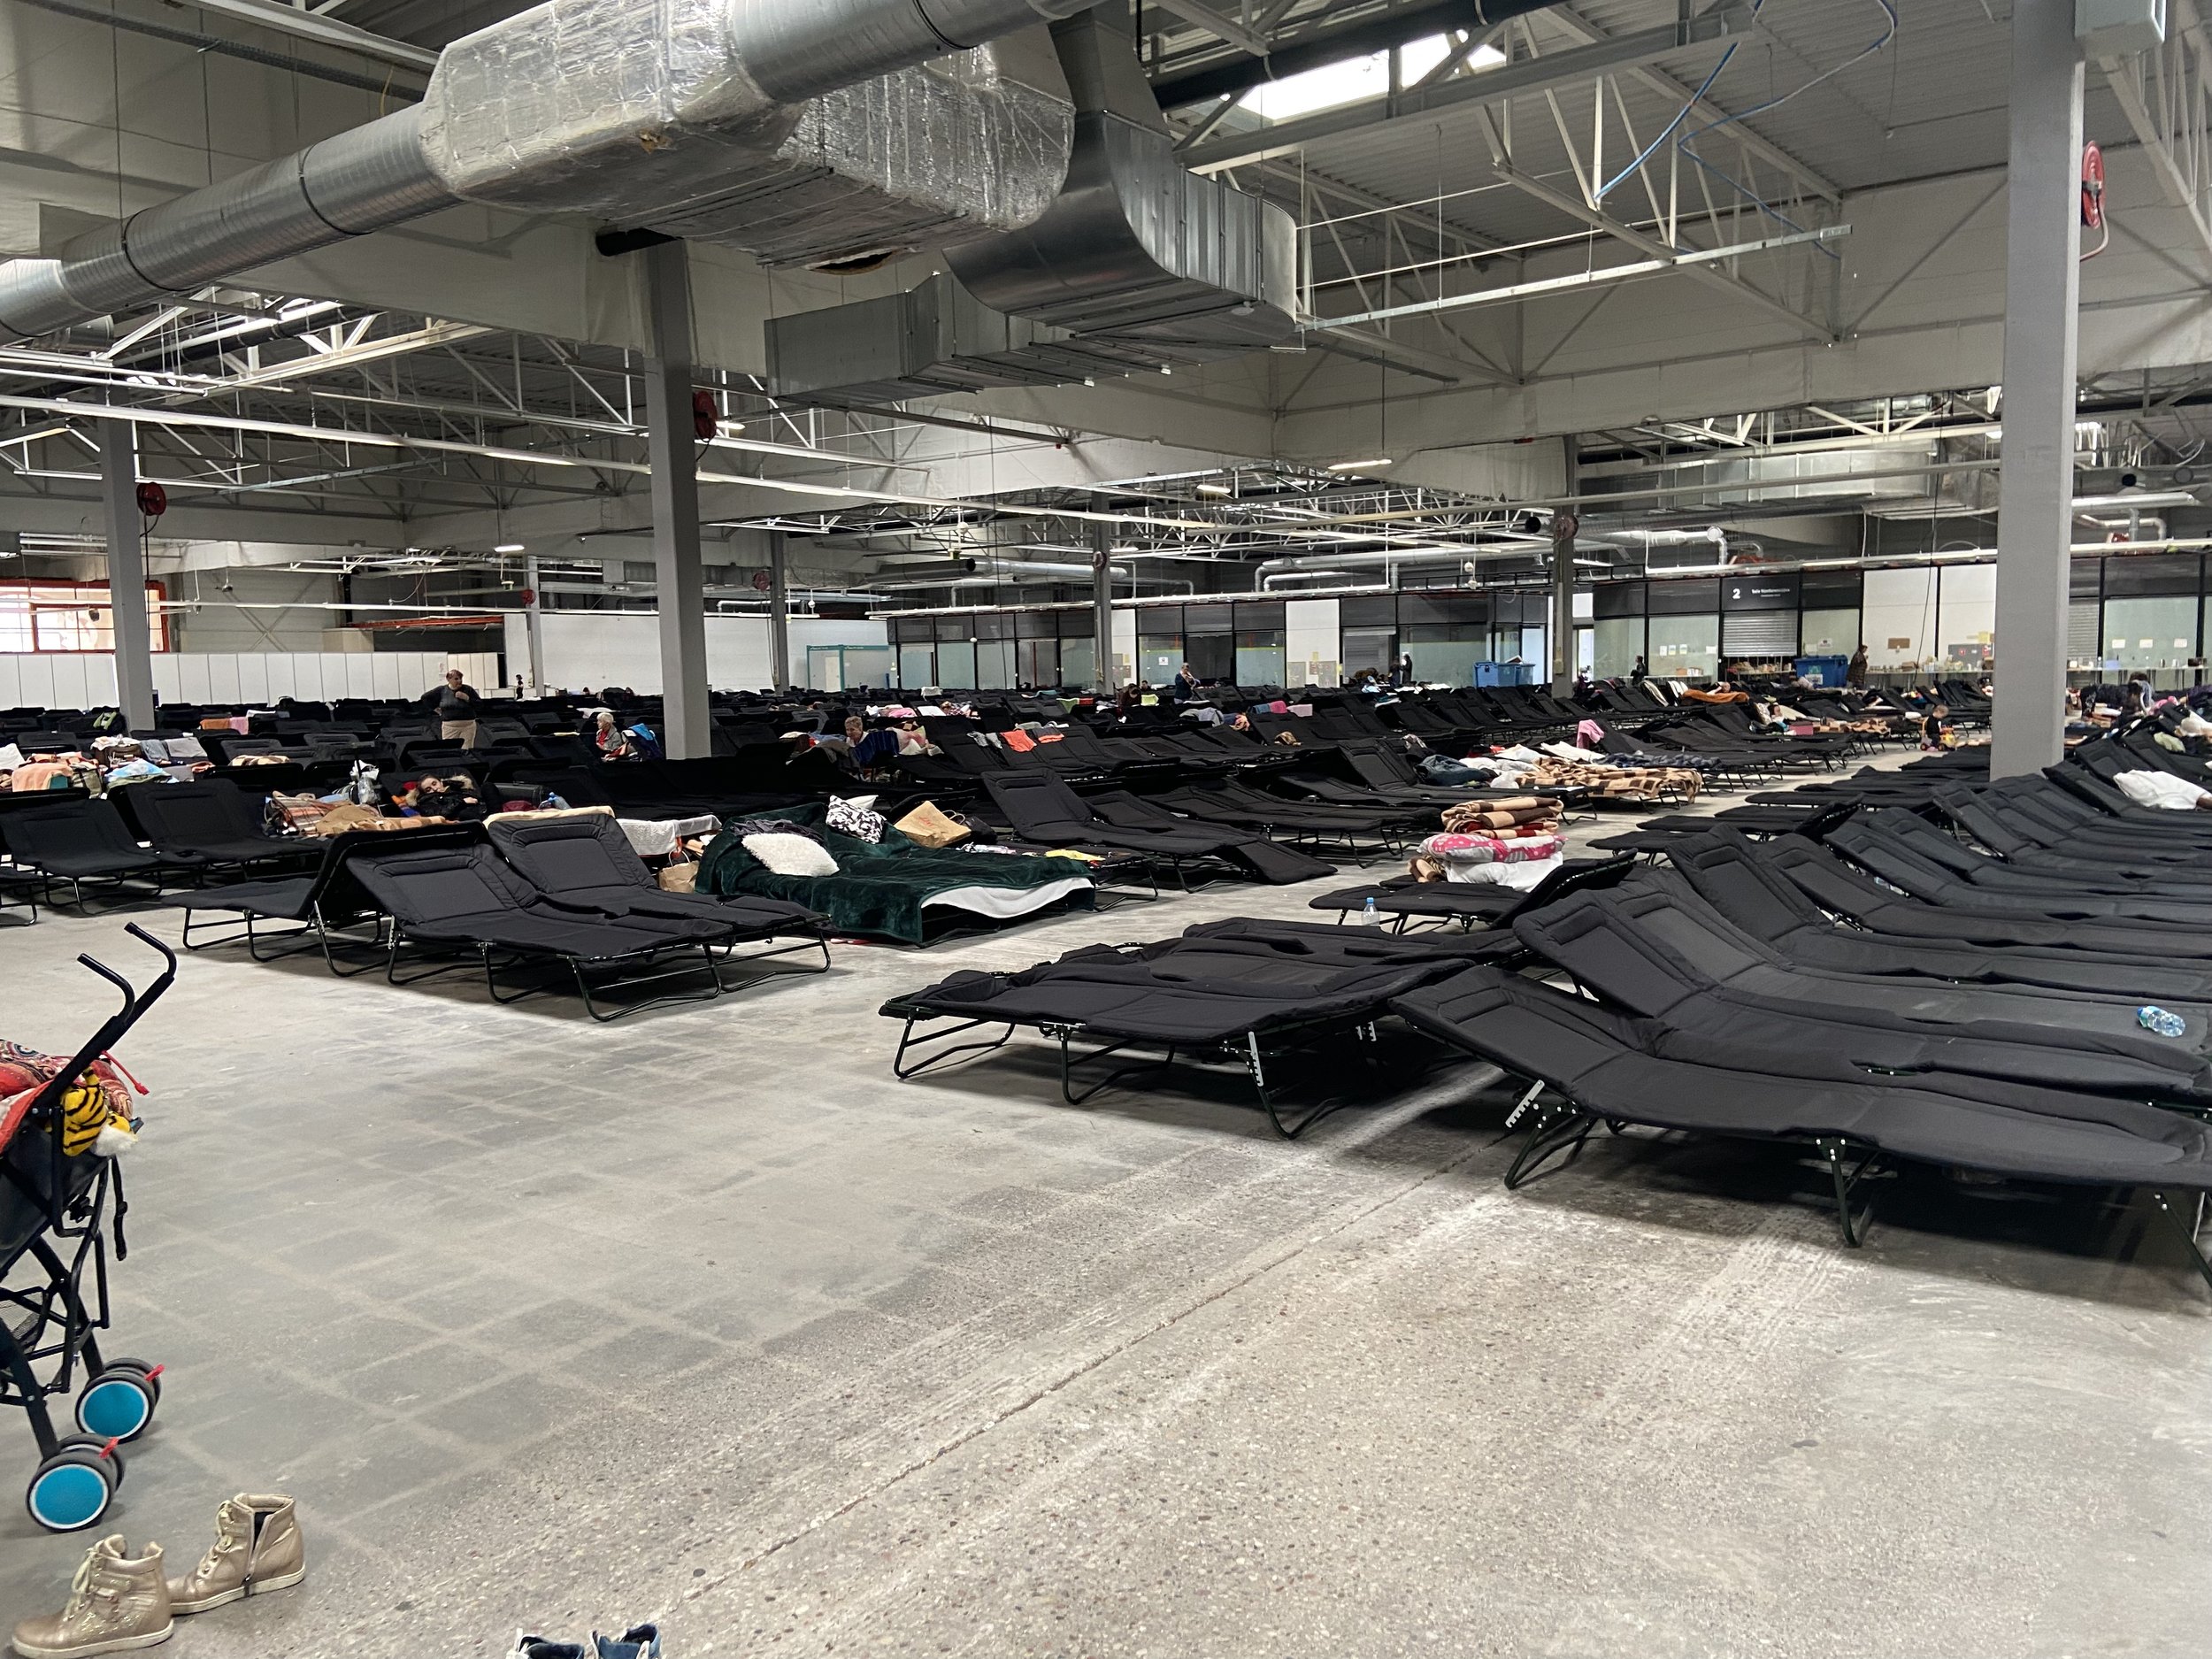 A sea of cots at the refugee center